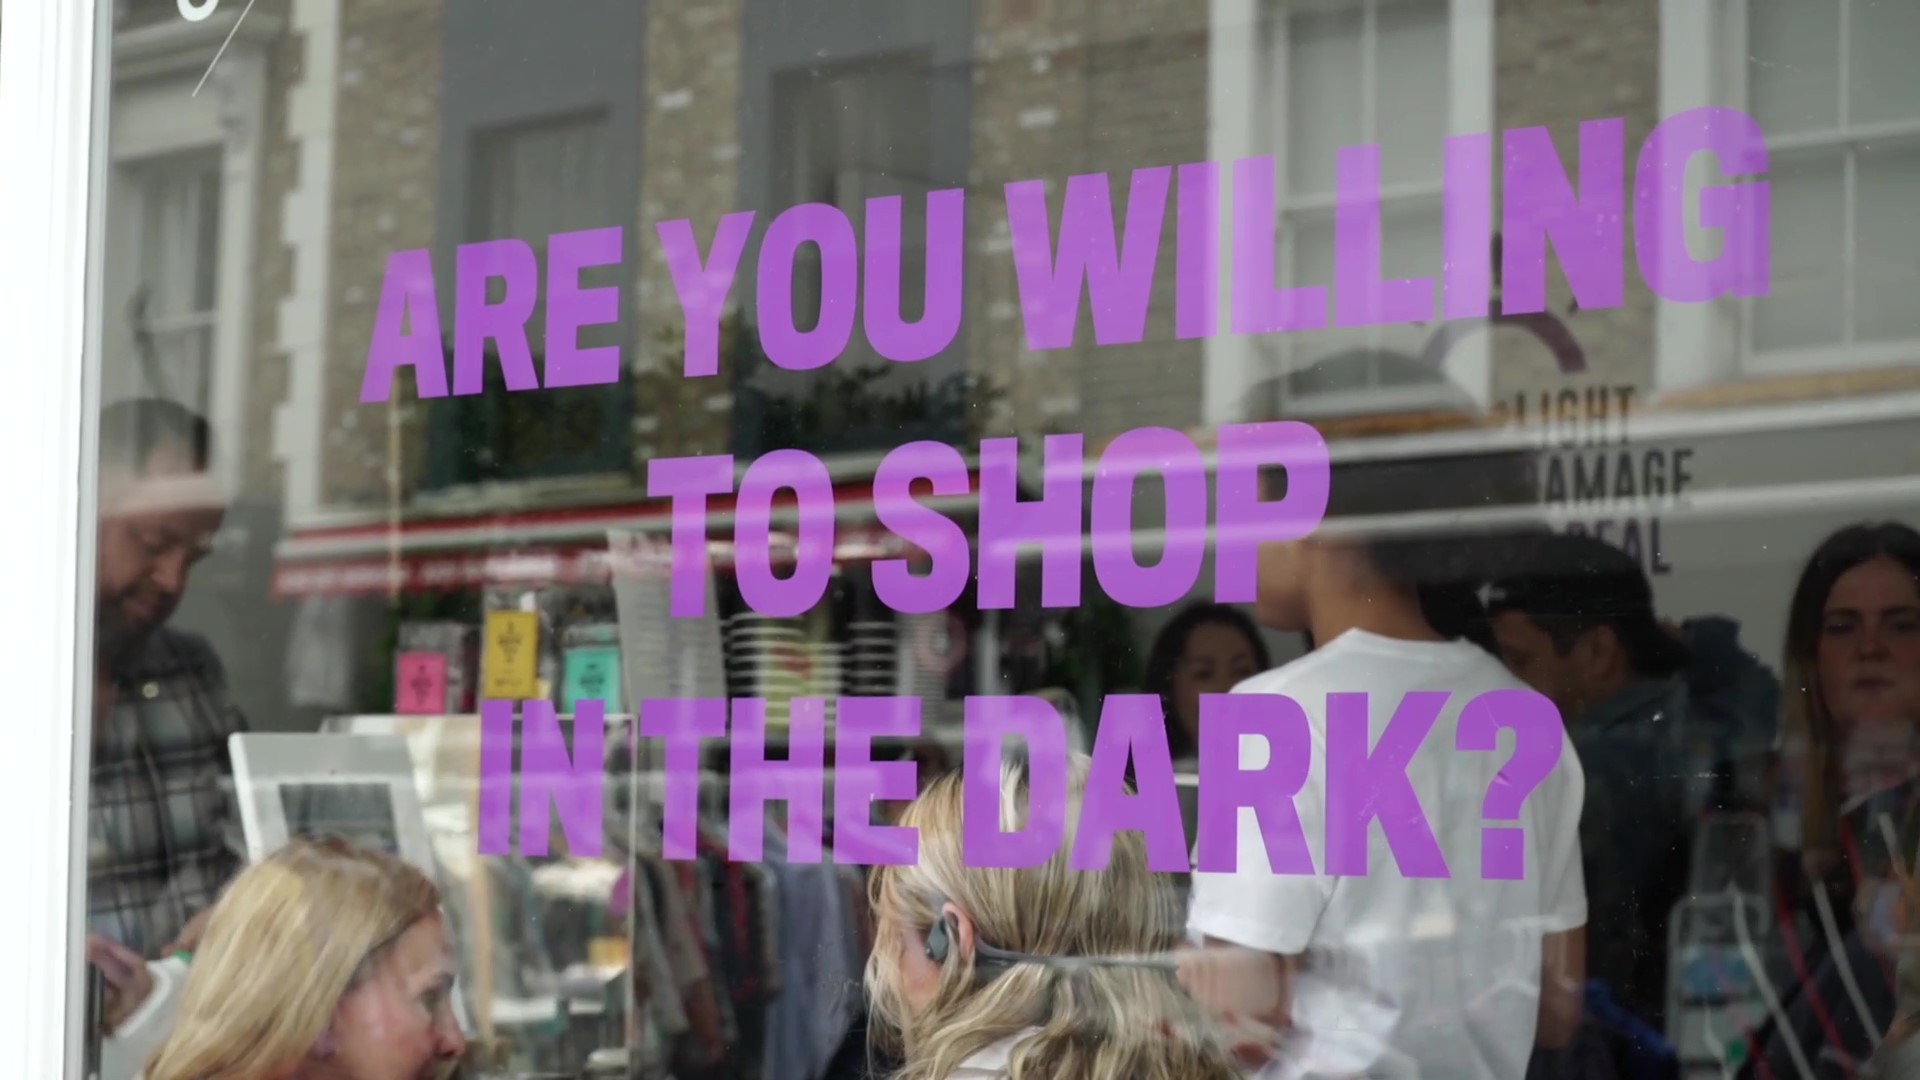 Transforming the milk industry campaign window sign stating are you willing to shop in the dark?